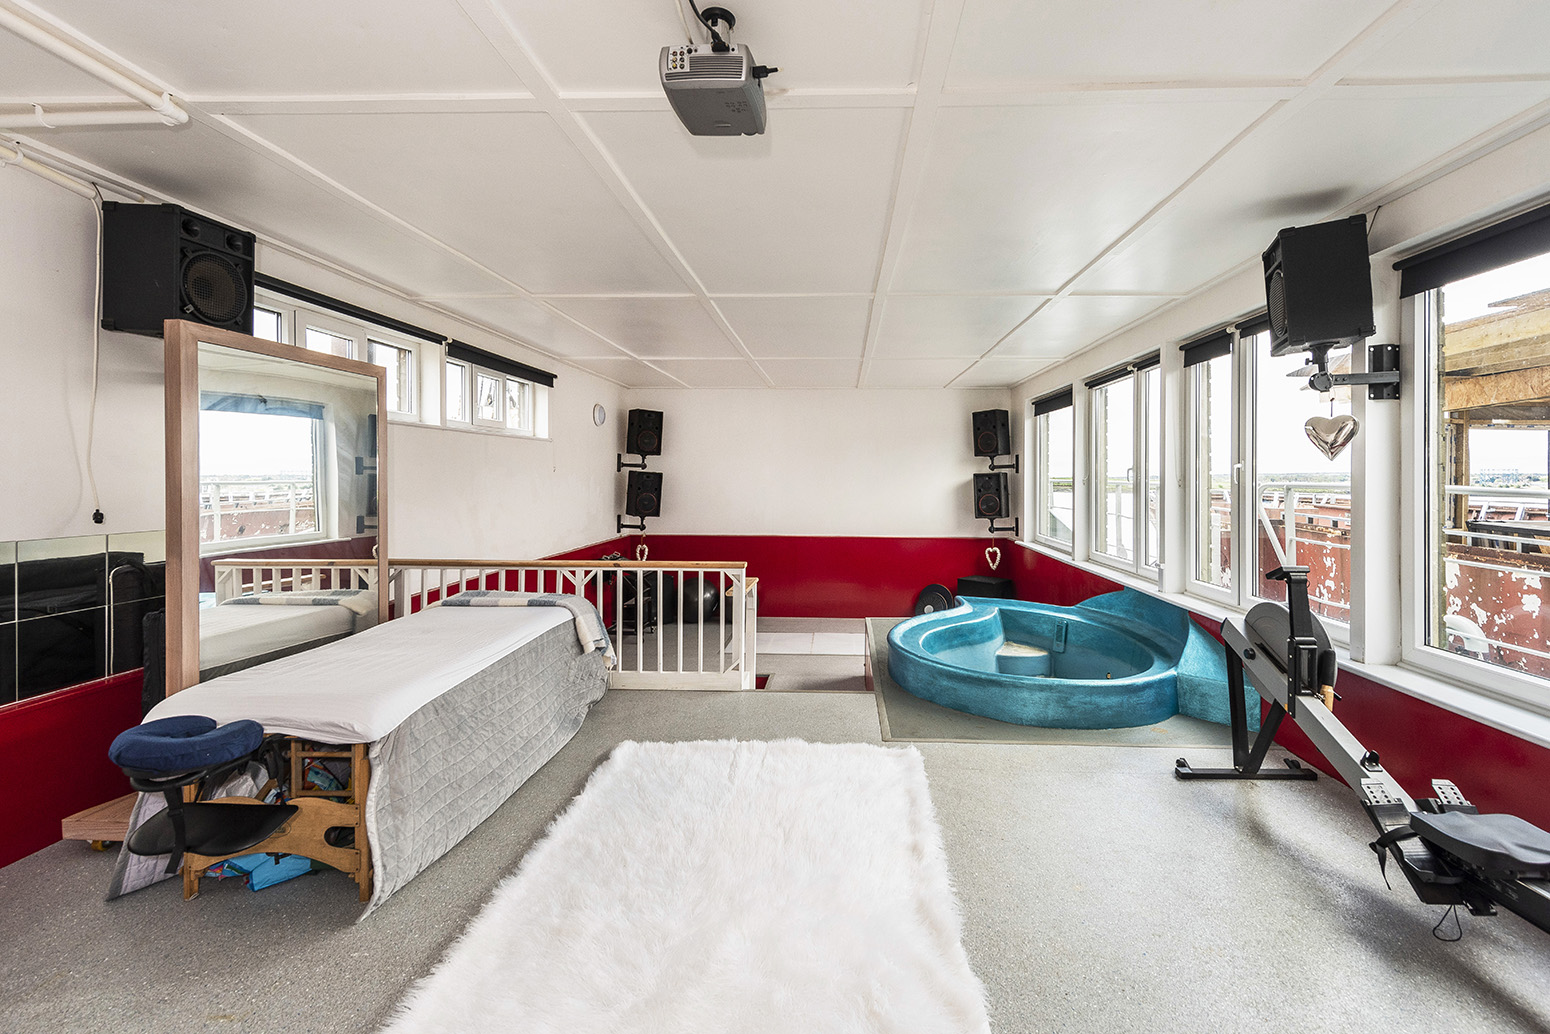 8 bed house boat for sale in Vicarage Lane, Rochester 25